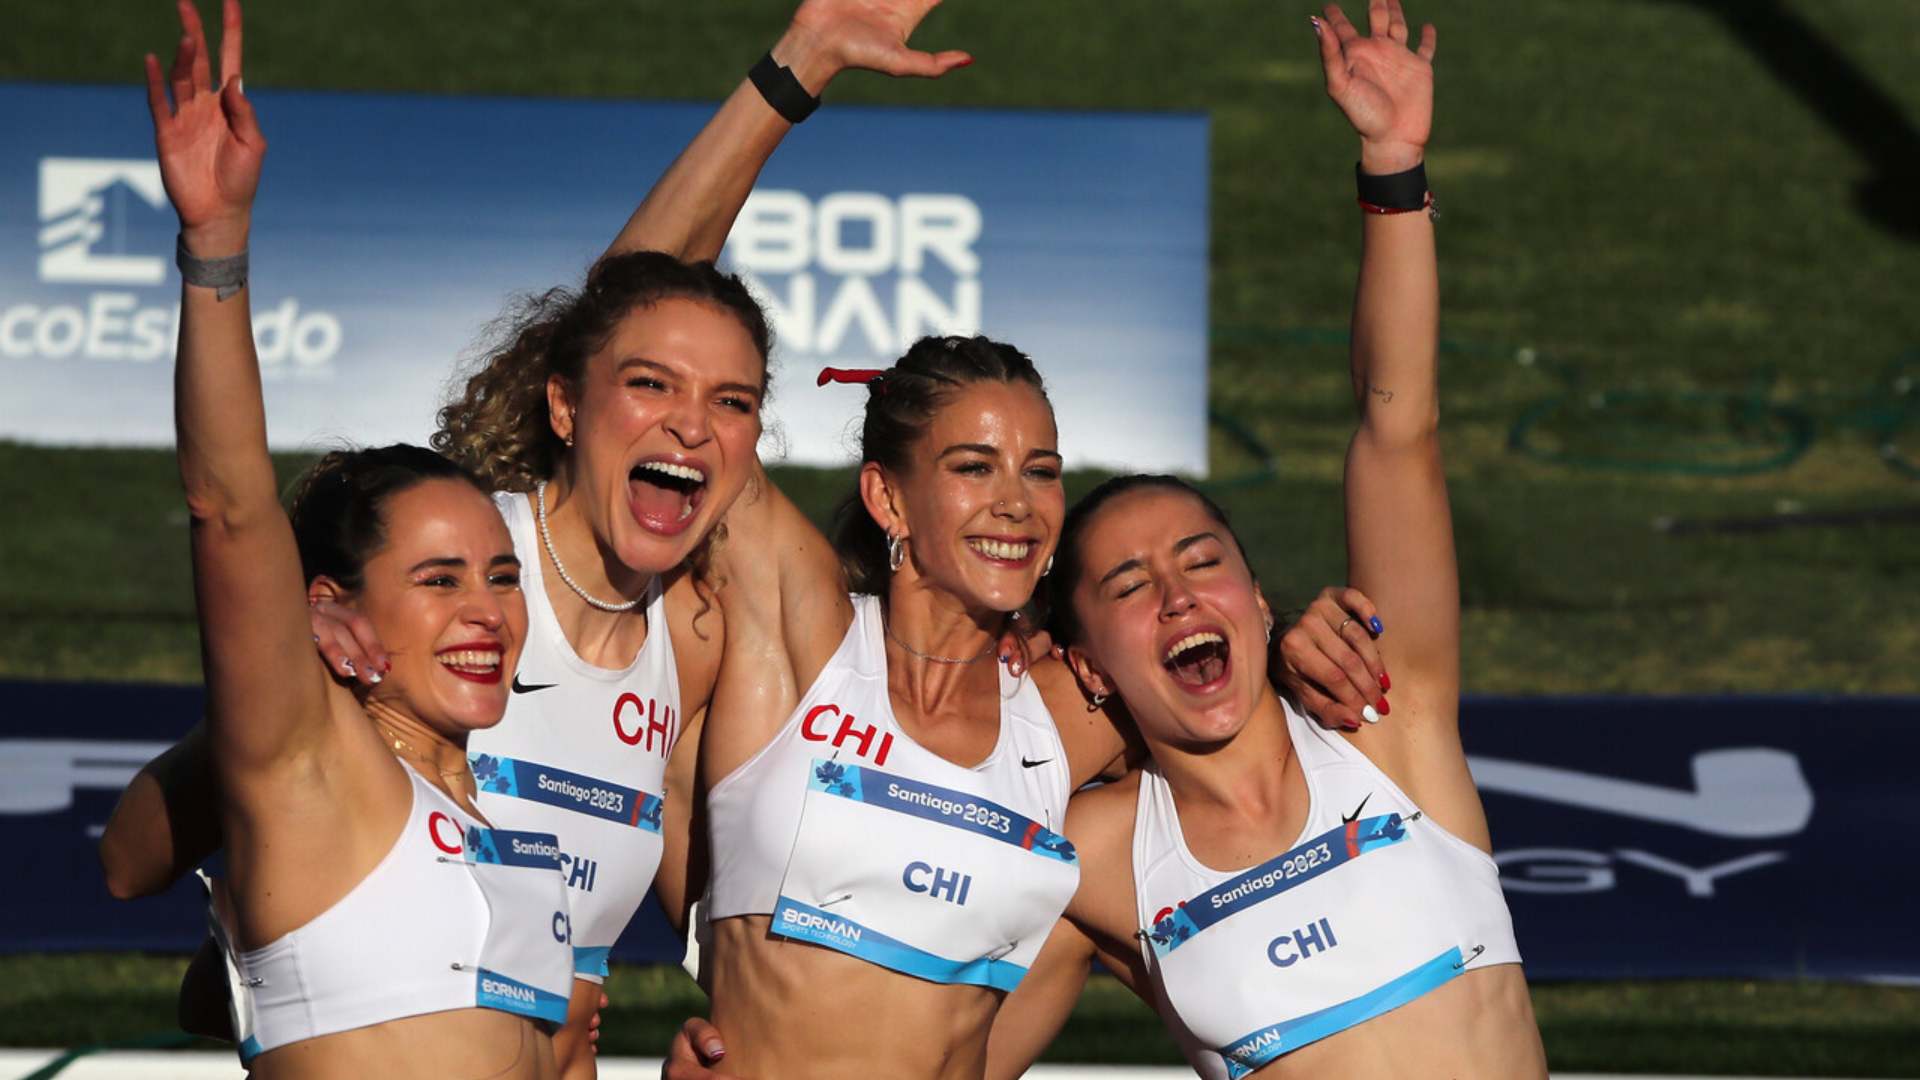 Chile qualifies for the female's 4x100 final with a new national record.